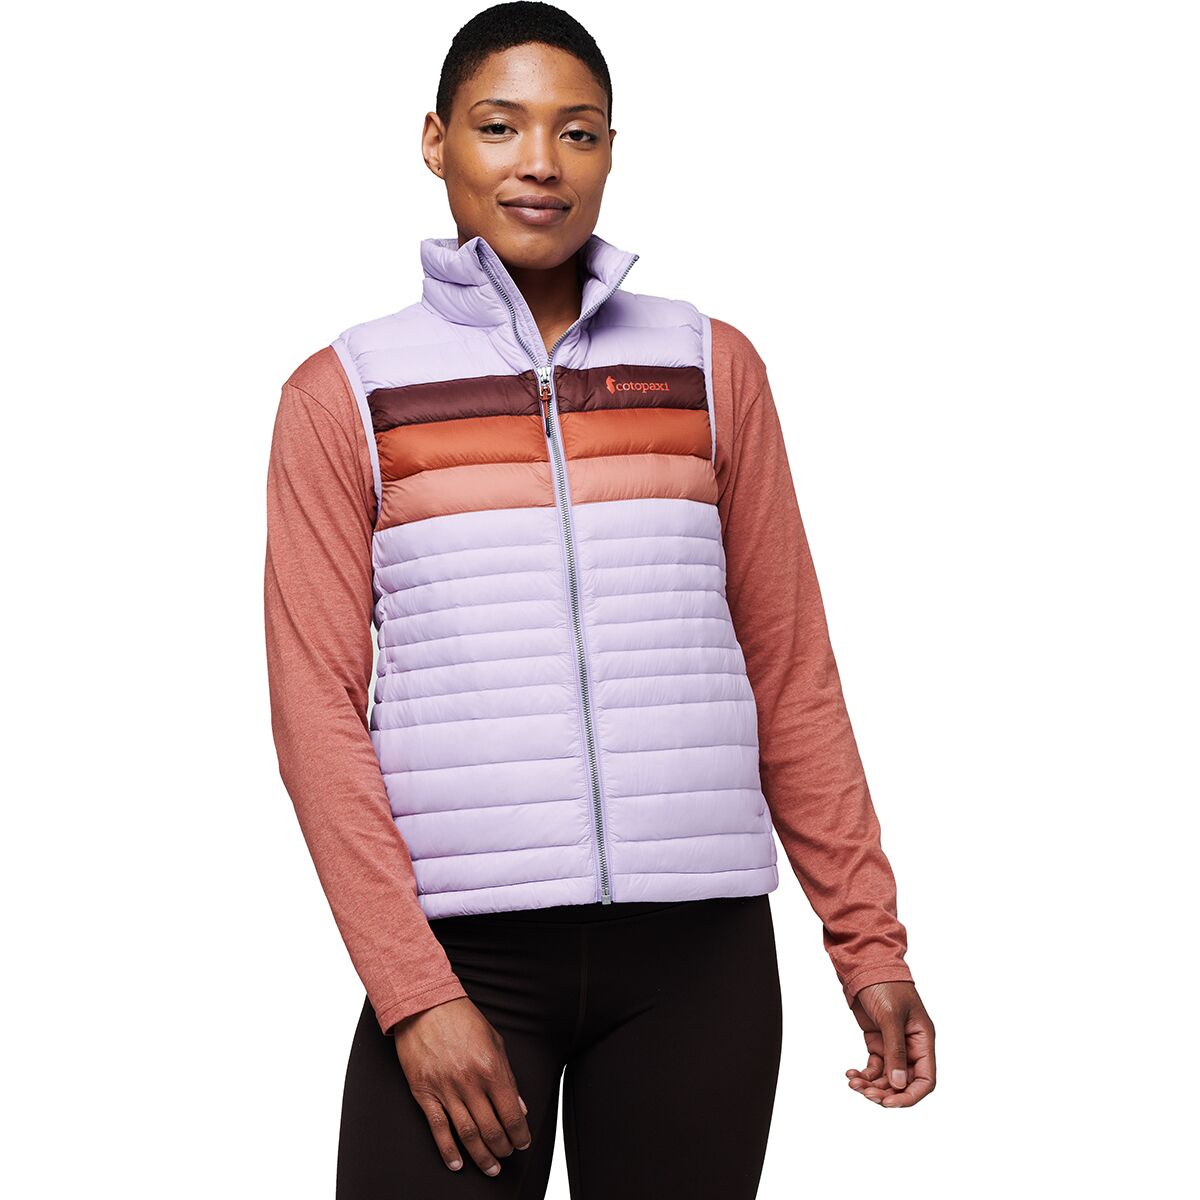 Cotopaxi Fuego Down Vest - Women's | Backcountry